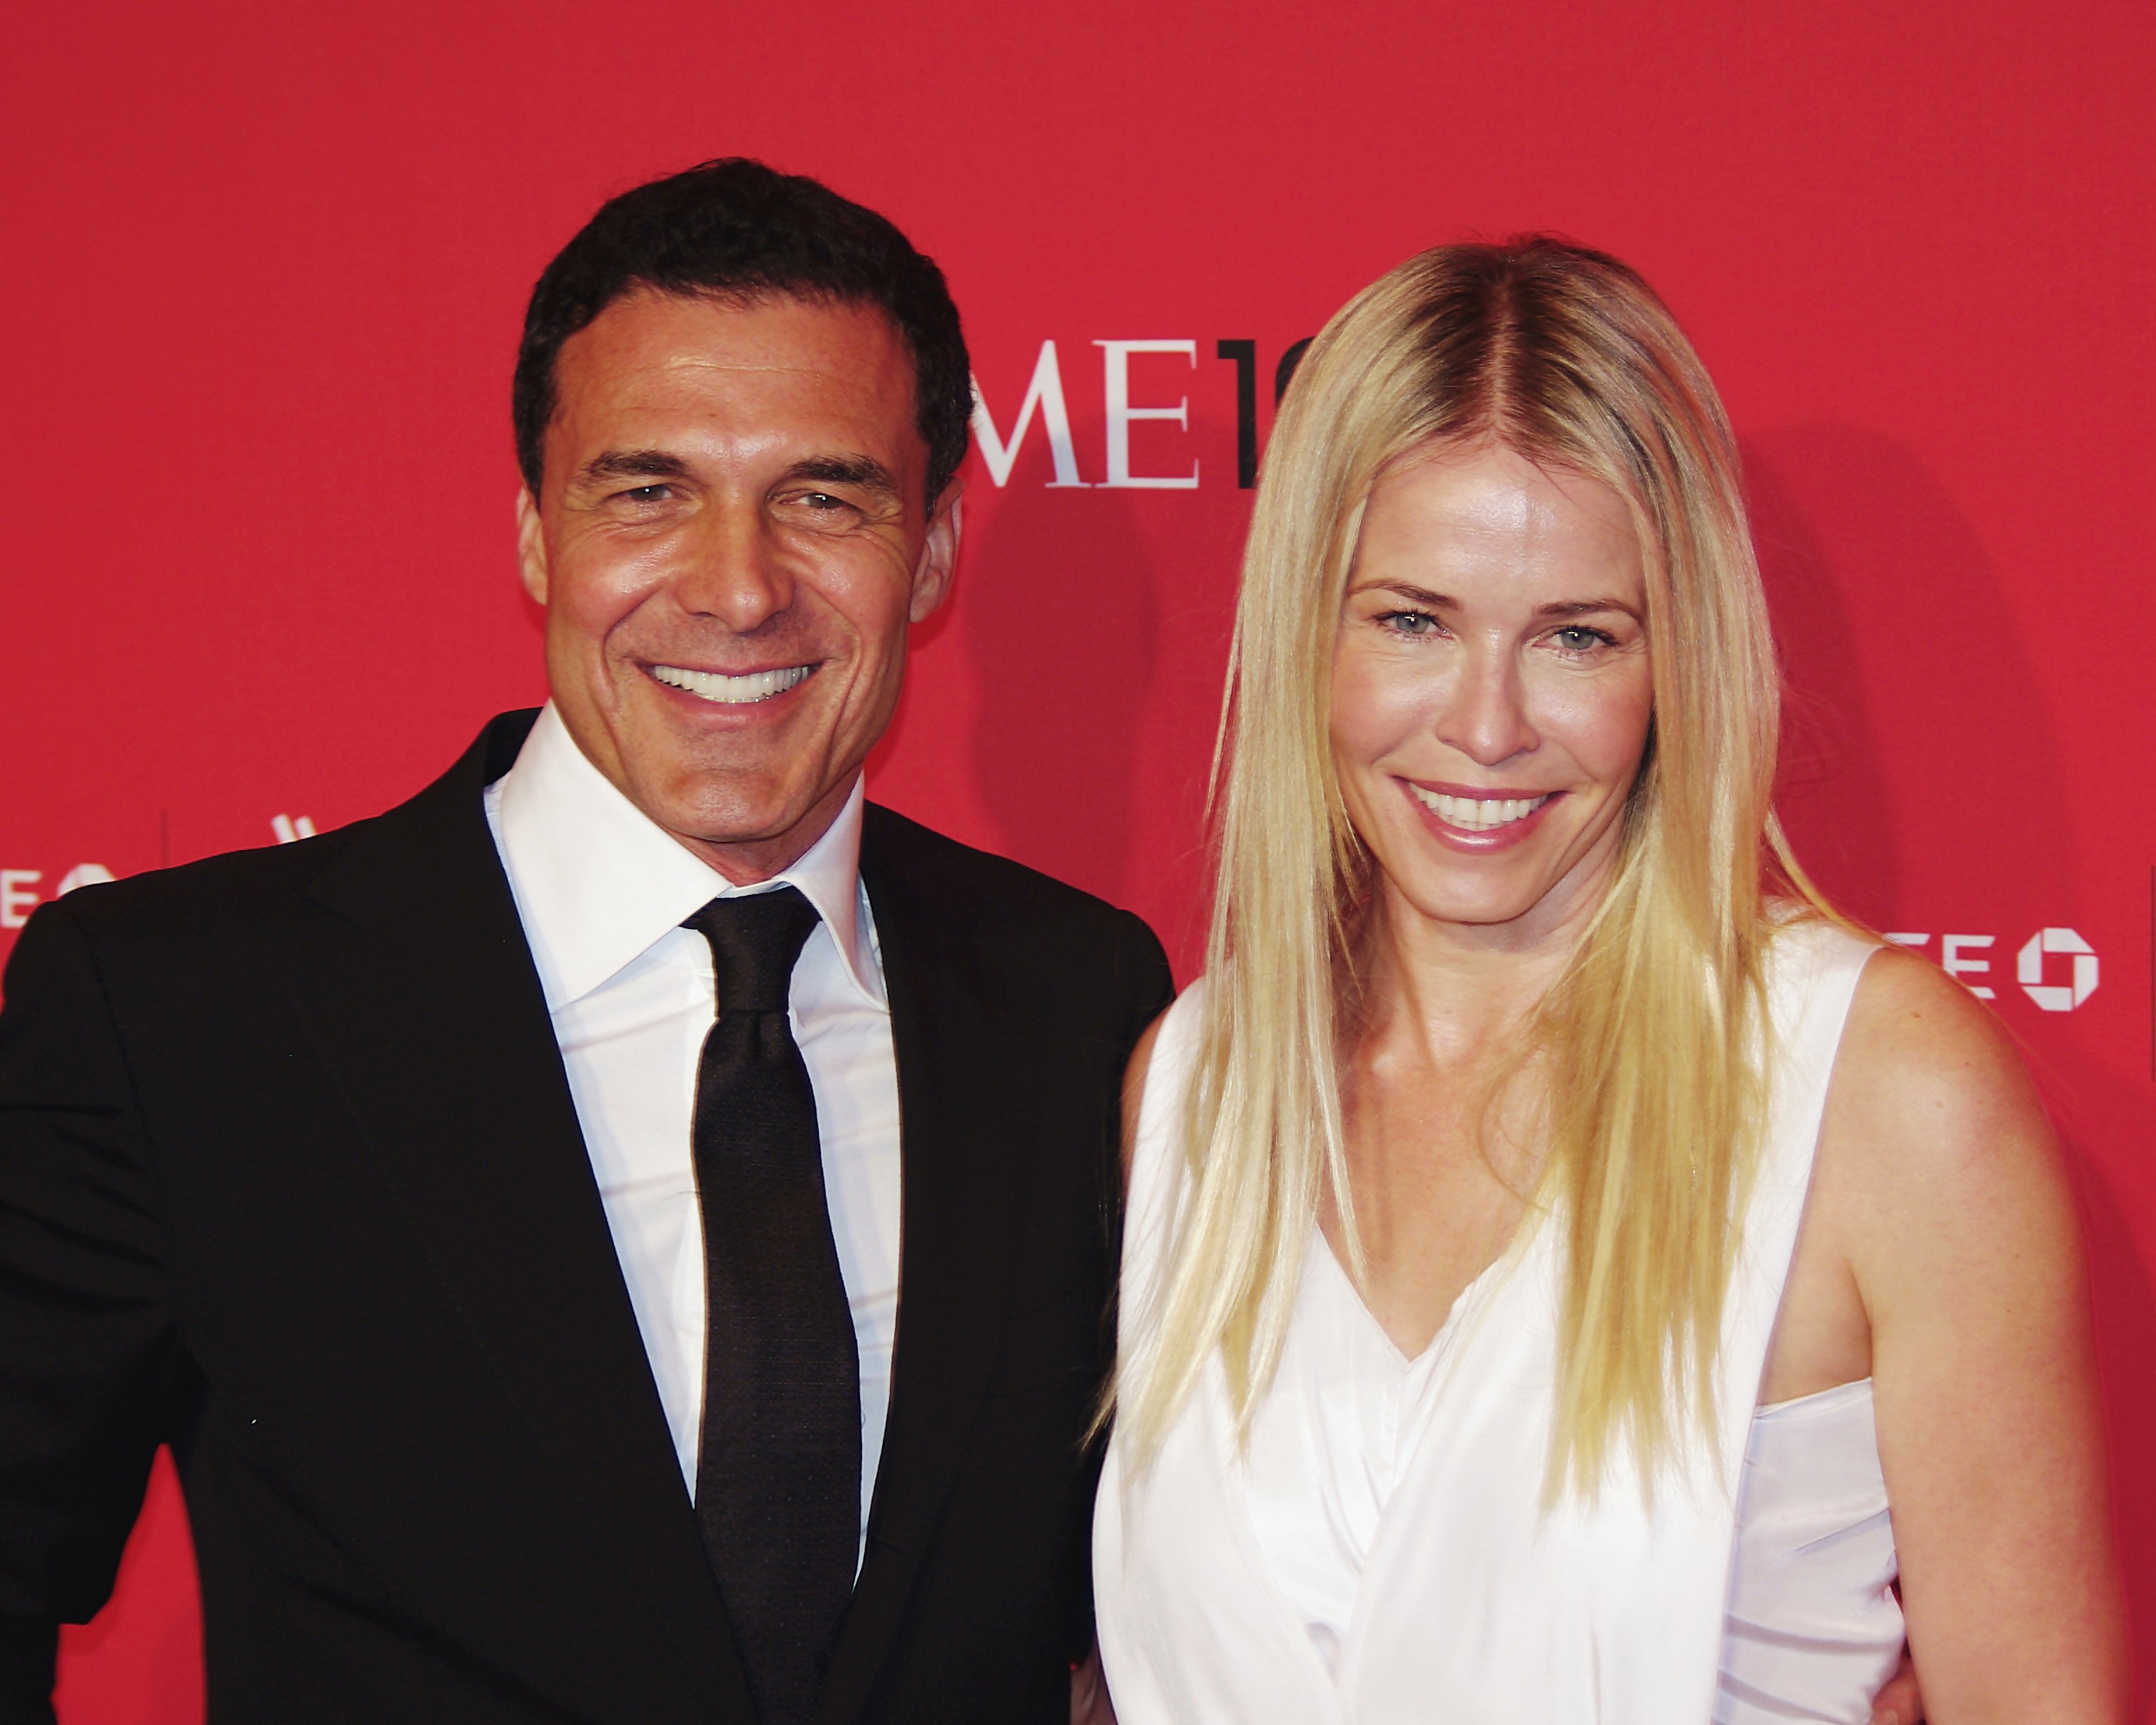 André Balazs with Chelsea Handler Image Source: Wikimedia Commons